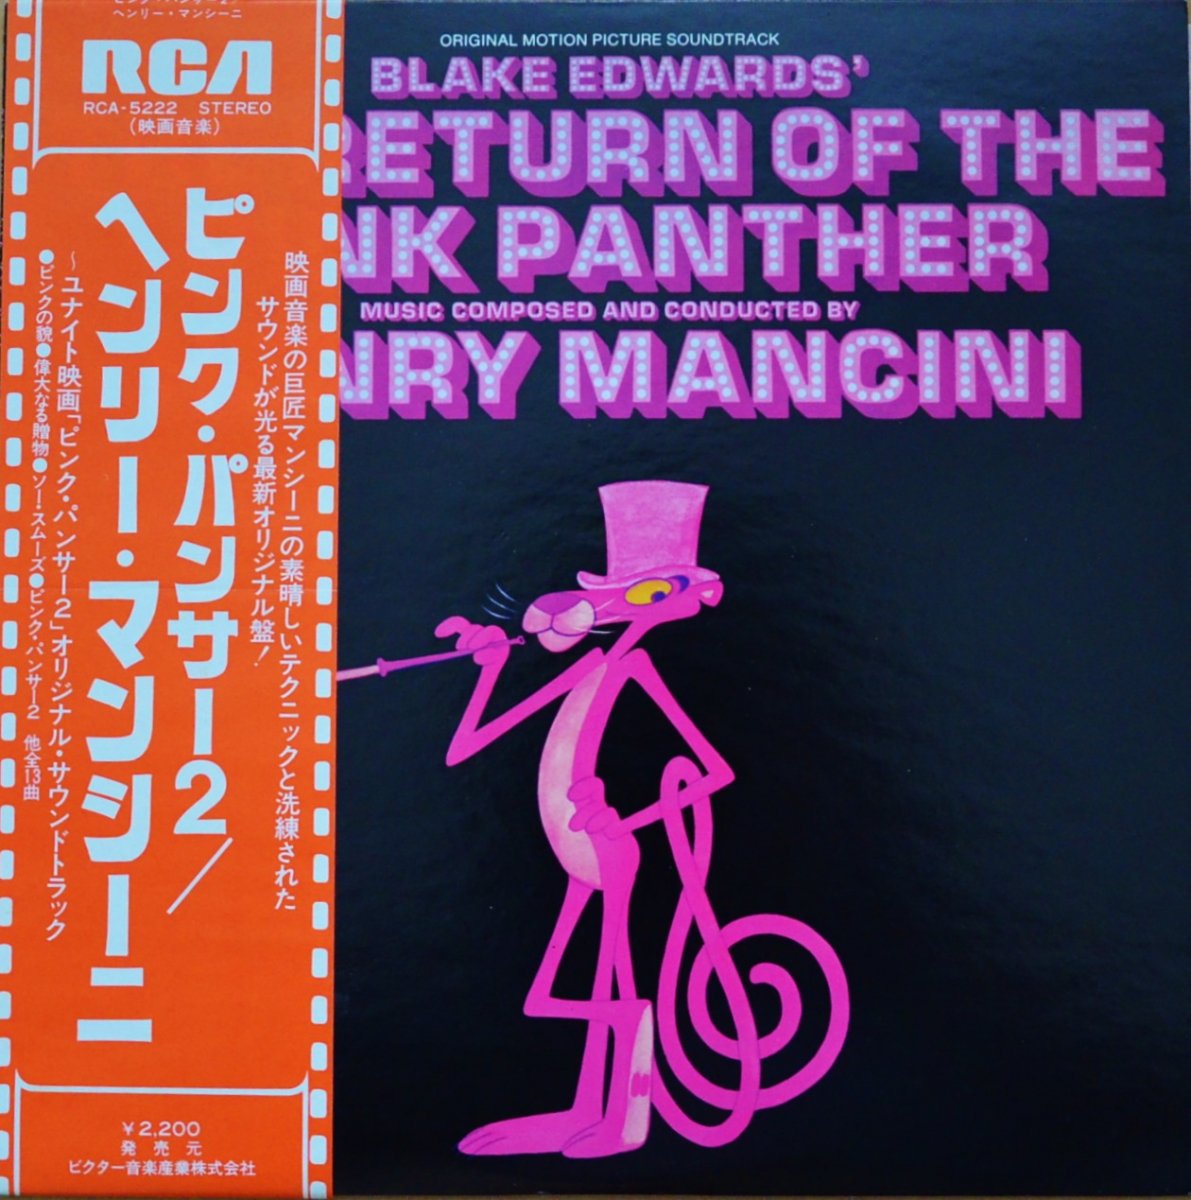 O.S.T. (HENRY MANCINI) u200e/ BLAKE EDWARDS' THE RETURN OF THE PINK PANTHER  (LP) - HIP TANK RECORDS